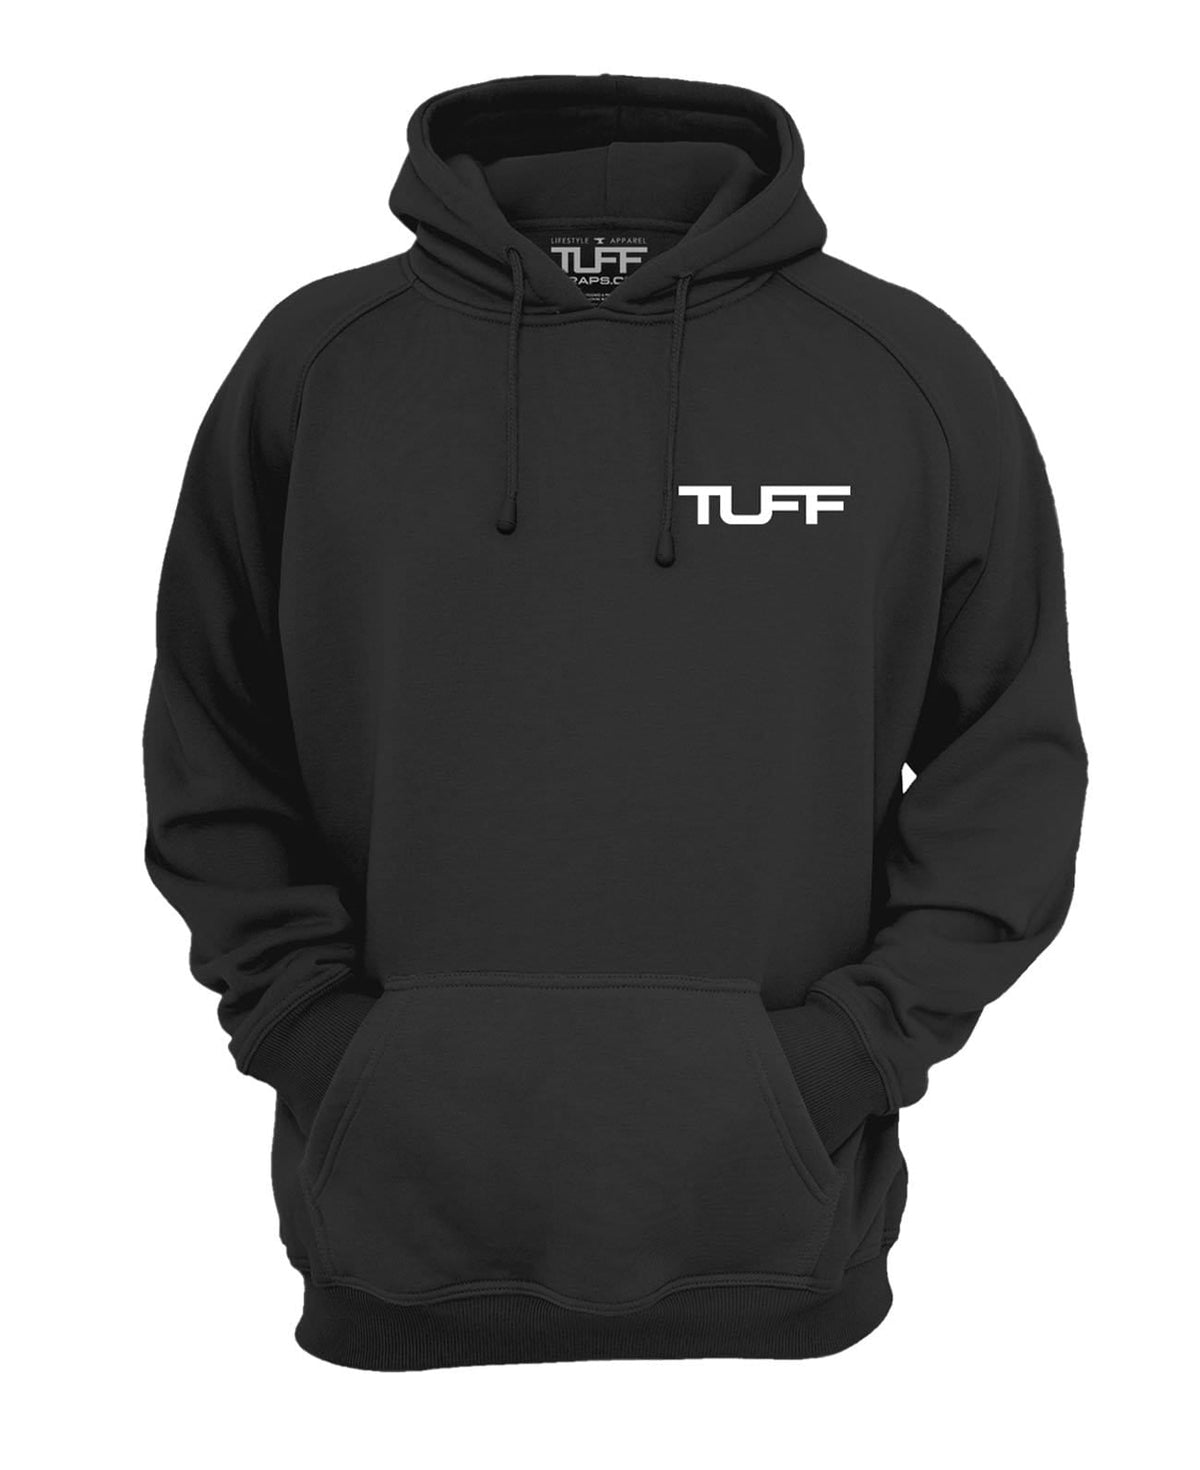 Angels to Some, Death to Most Hooded Sweatshirt TuffWraps.com